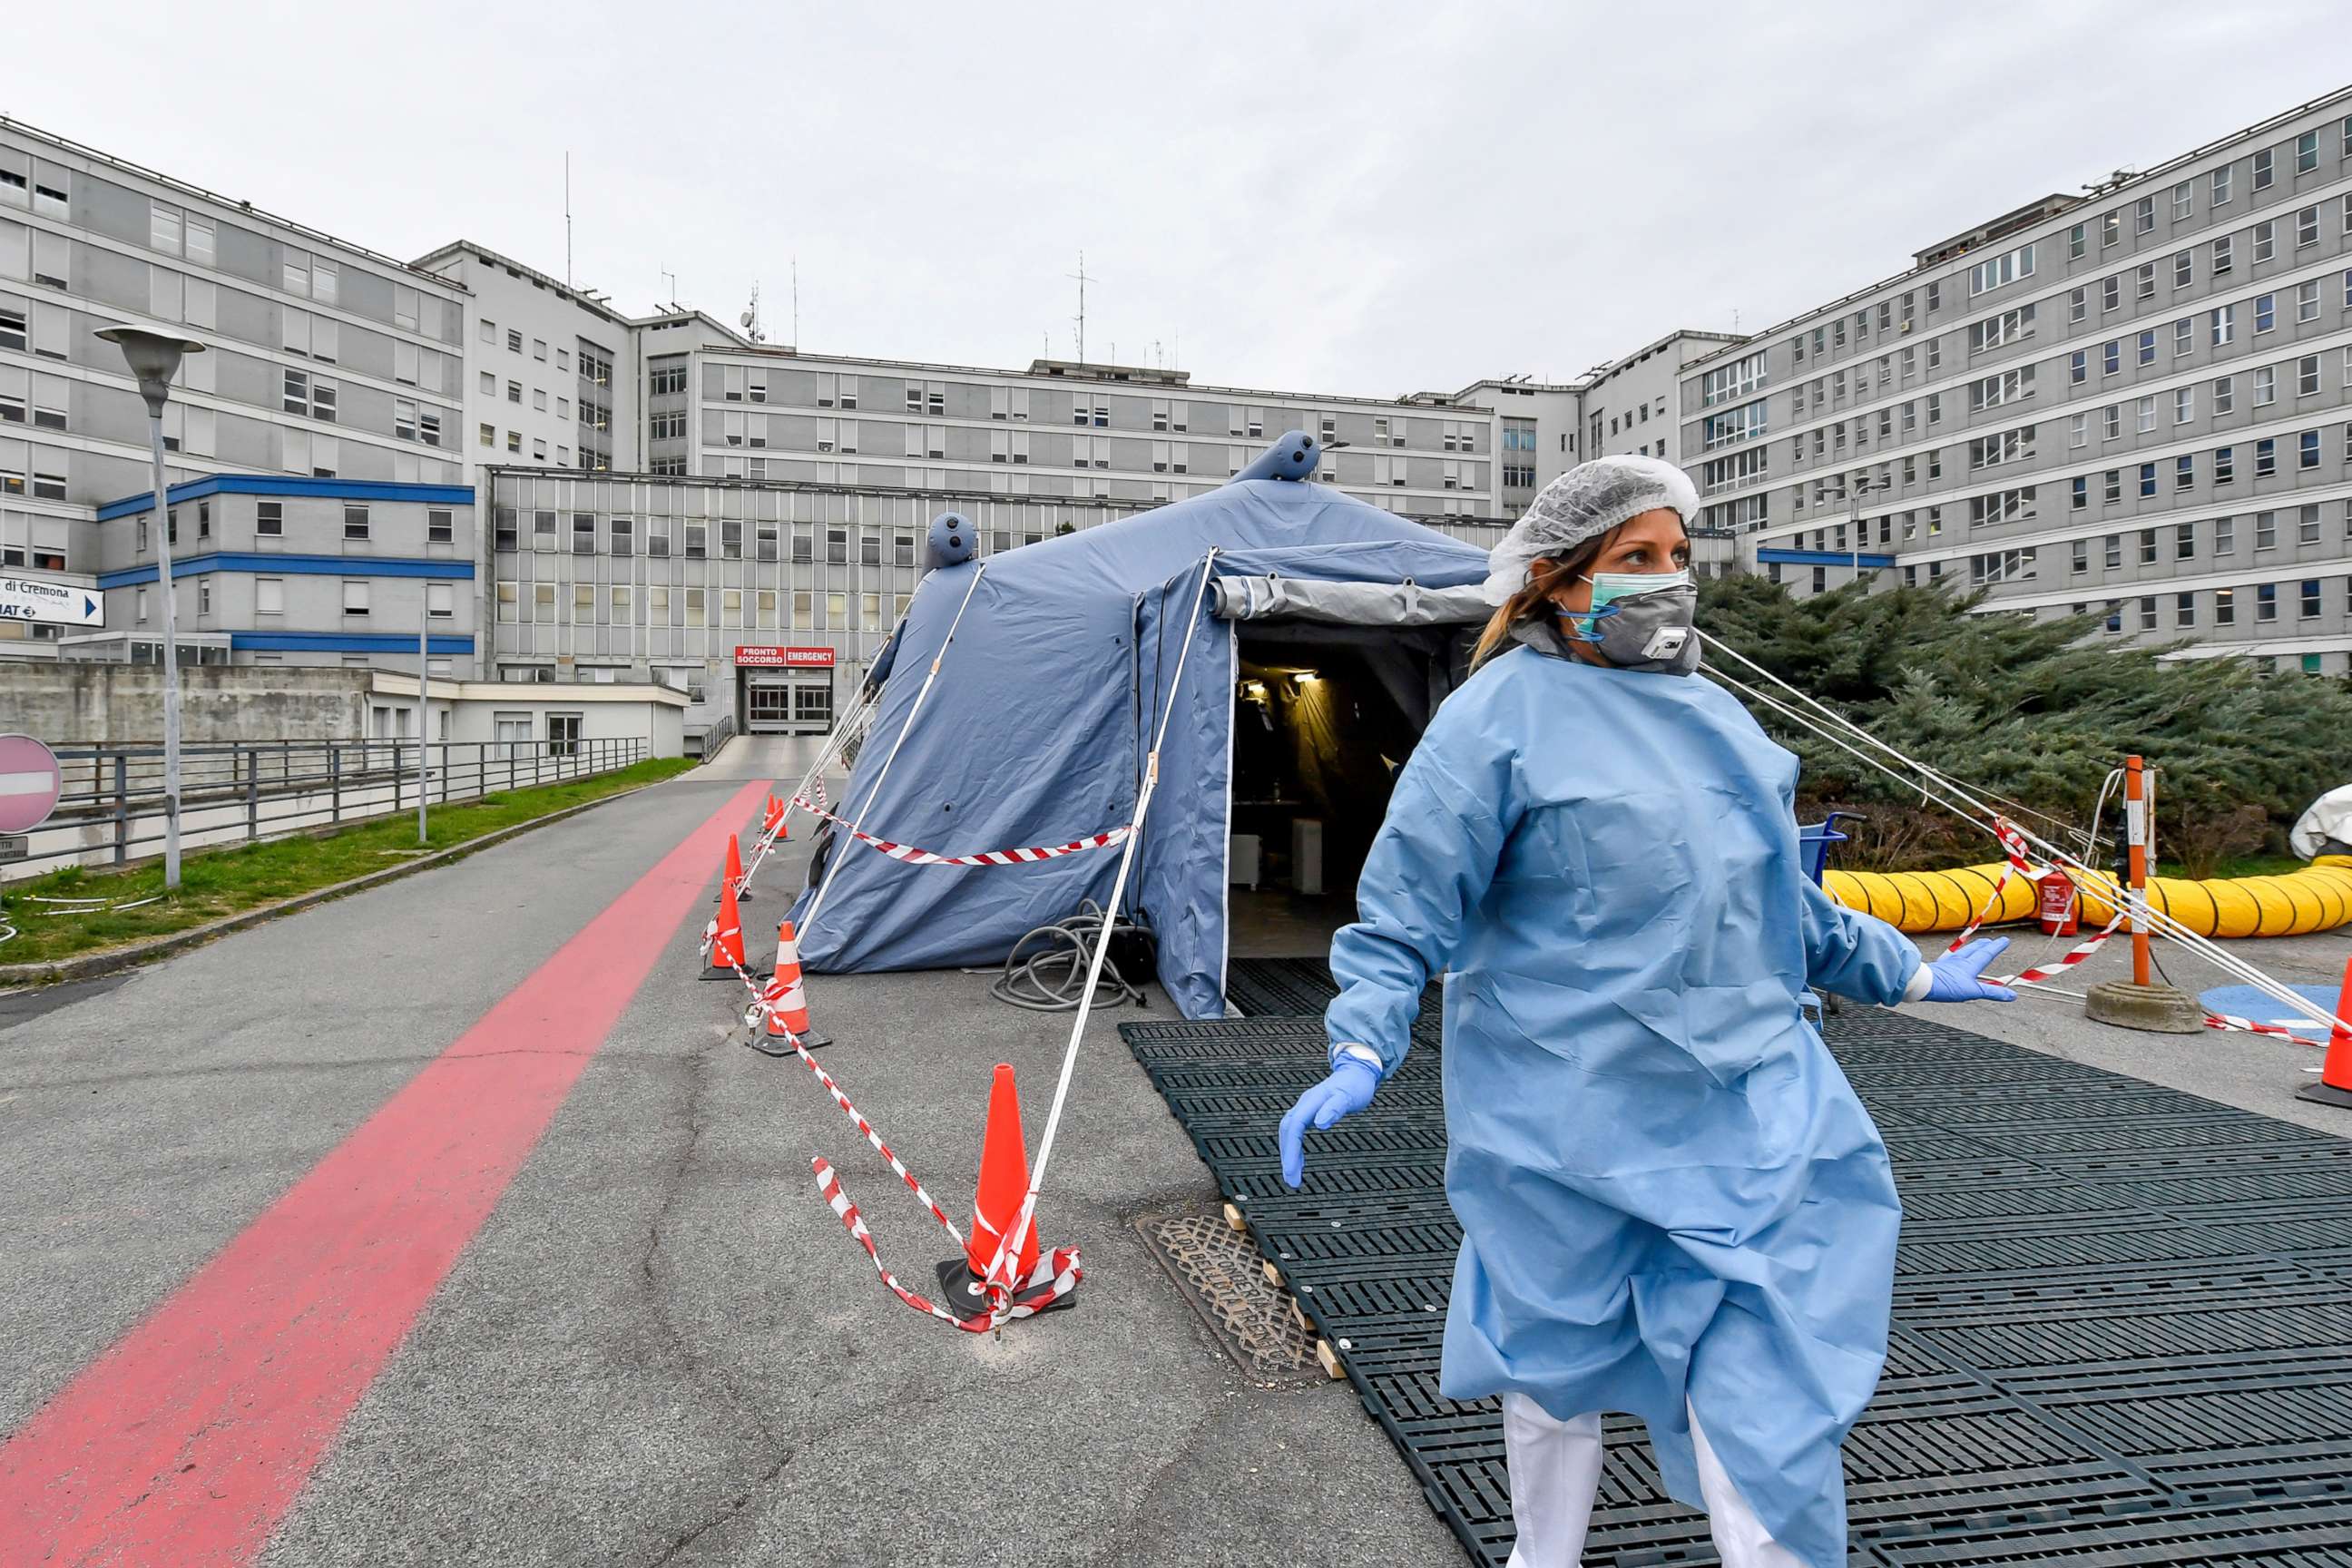 PHOTO: A paramedic walks out of a tent that was set up in front of the emergency ward of the Cremona hospital, northern Italy, Feb. 29, 2020. 